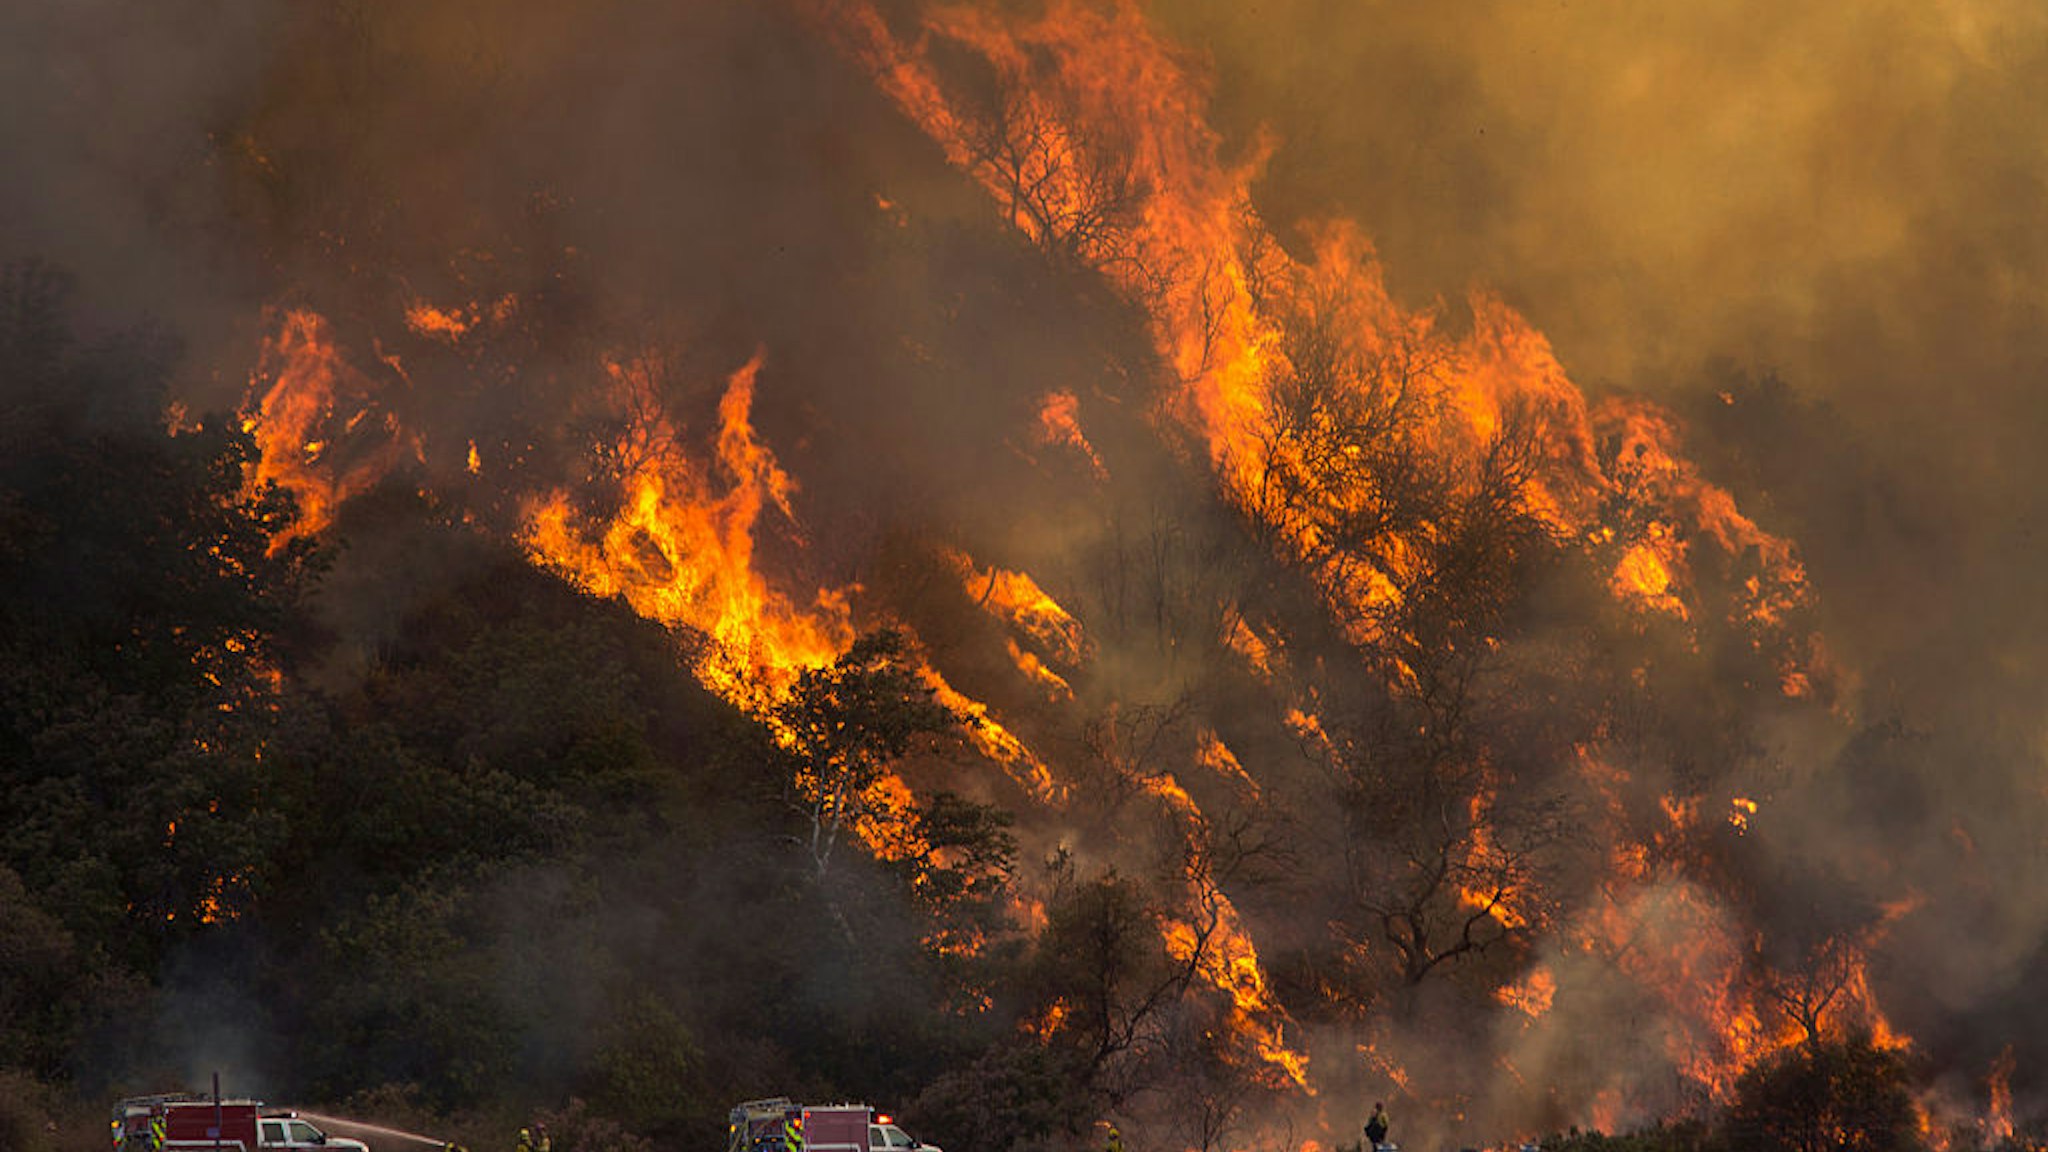 WRIGHTWOOD, CA - AUGUST 18: Flames spread up a hillside near firefighters at the Blue Cut Fire on August 18, 2016 near Wrightwood, California.. An unknown number of homes and businesses have burned and more than 80,000 people were ordered to evacuate as the wildfire spreads beyond 30,000 acres and threatens to expand into the ski resort town of Wrightwood. (Photo by David McNew/Getty Images)